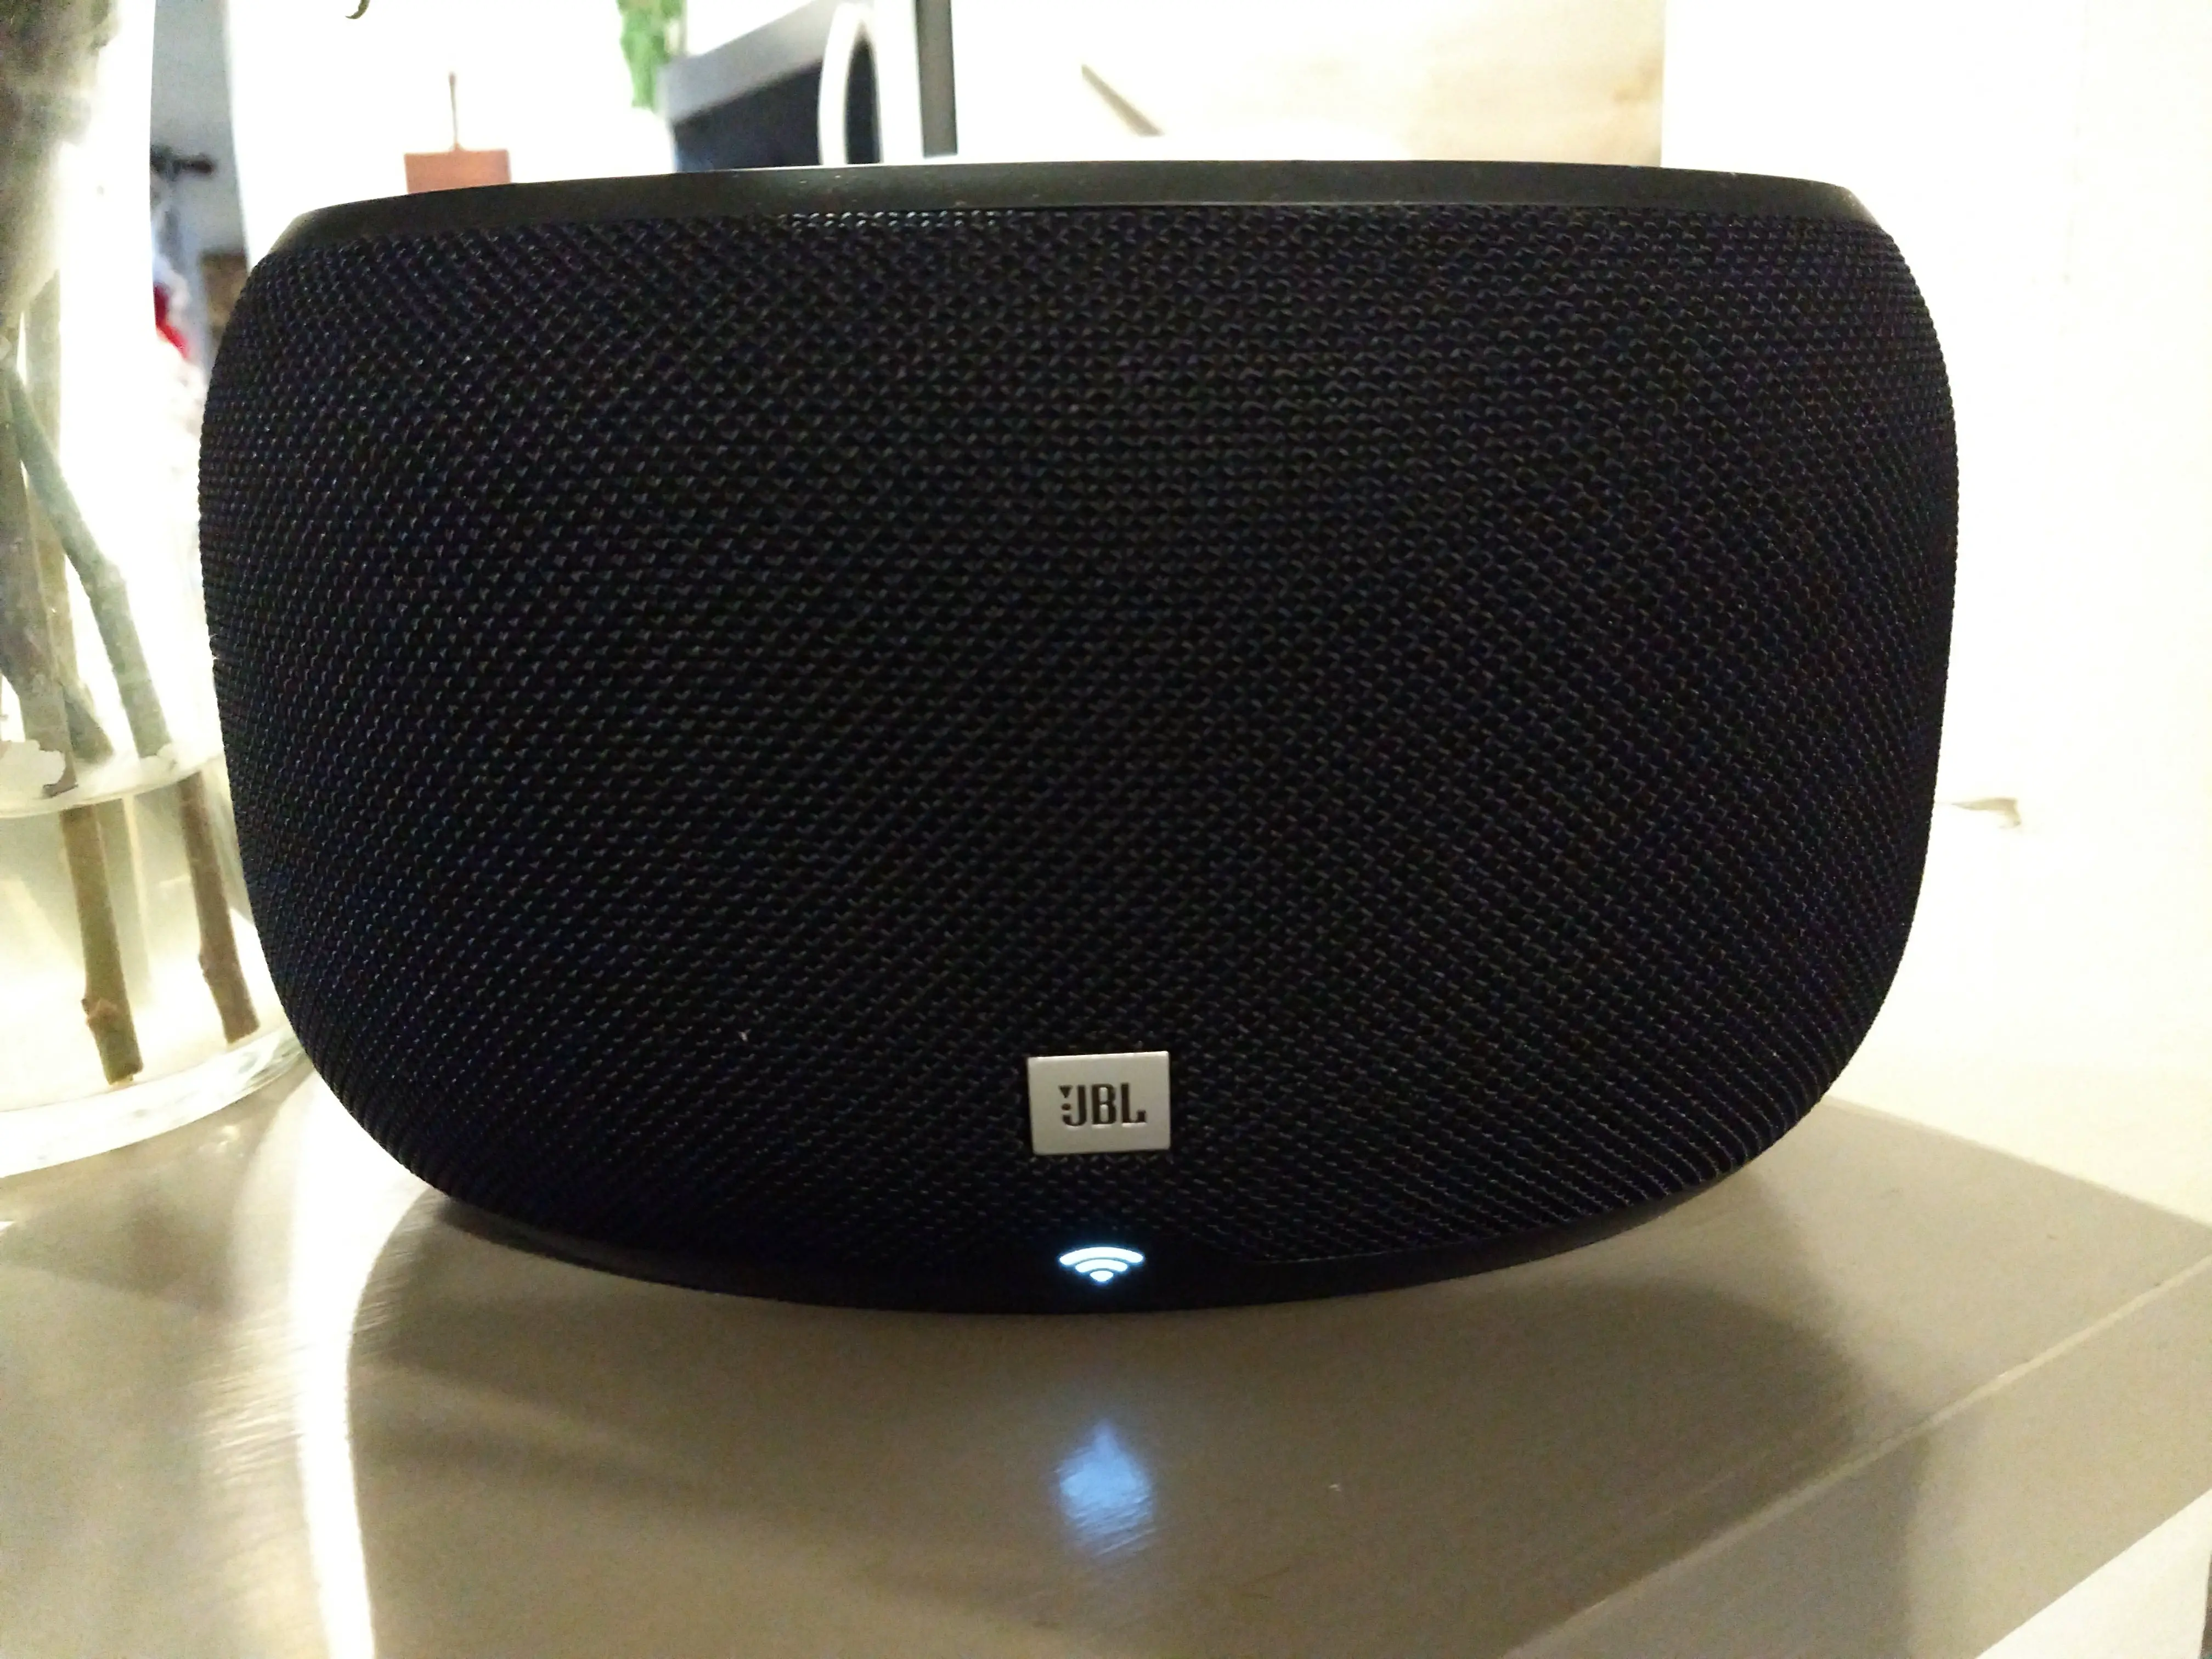 jbl 300 02 - for some reason we don't have an alt tag here